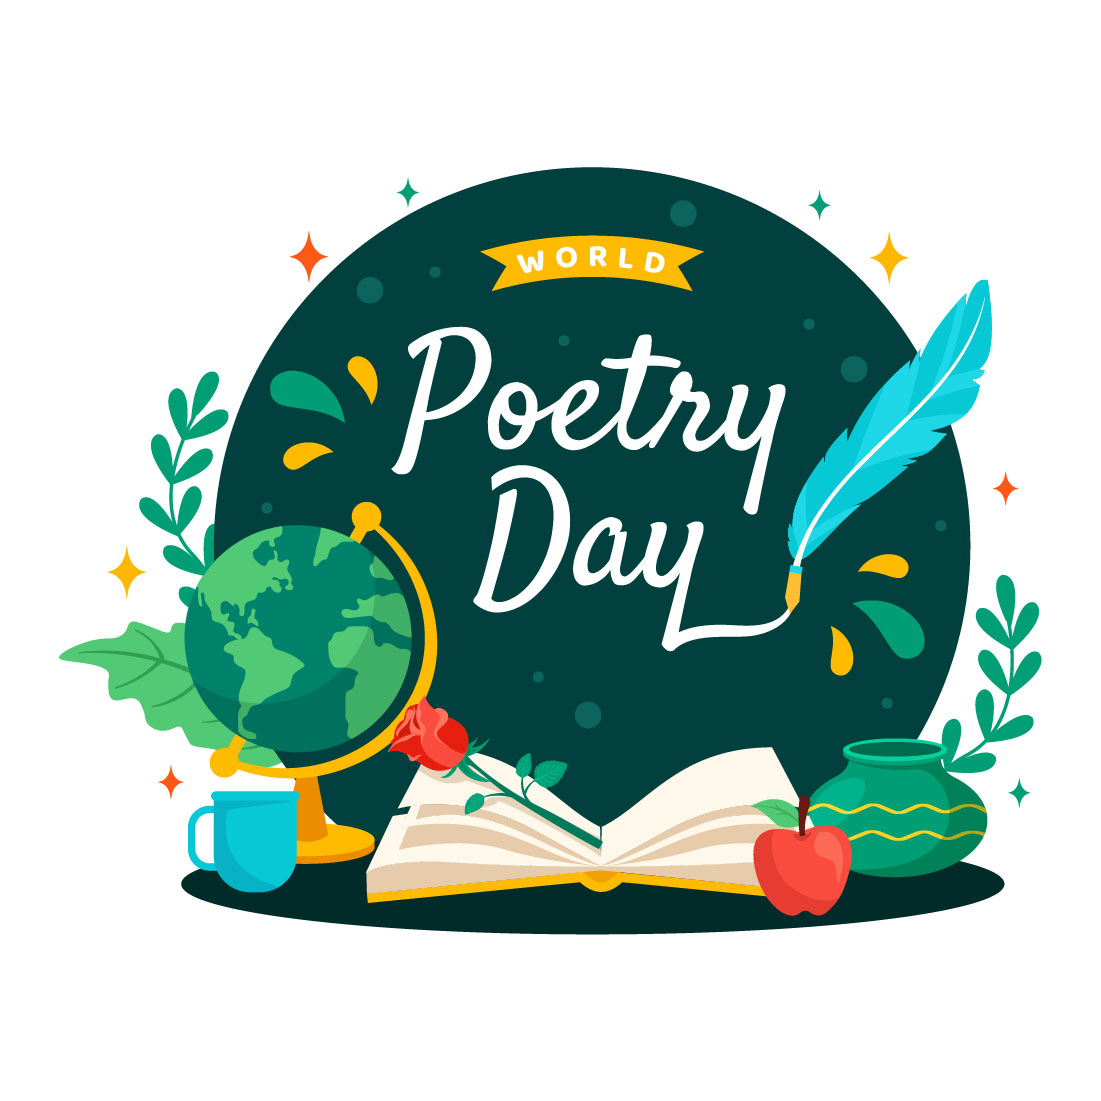 12 World Poetry Day Illustration preview image.